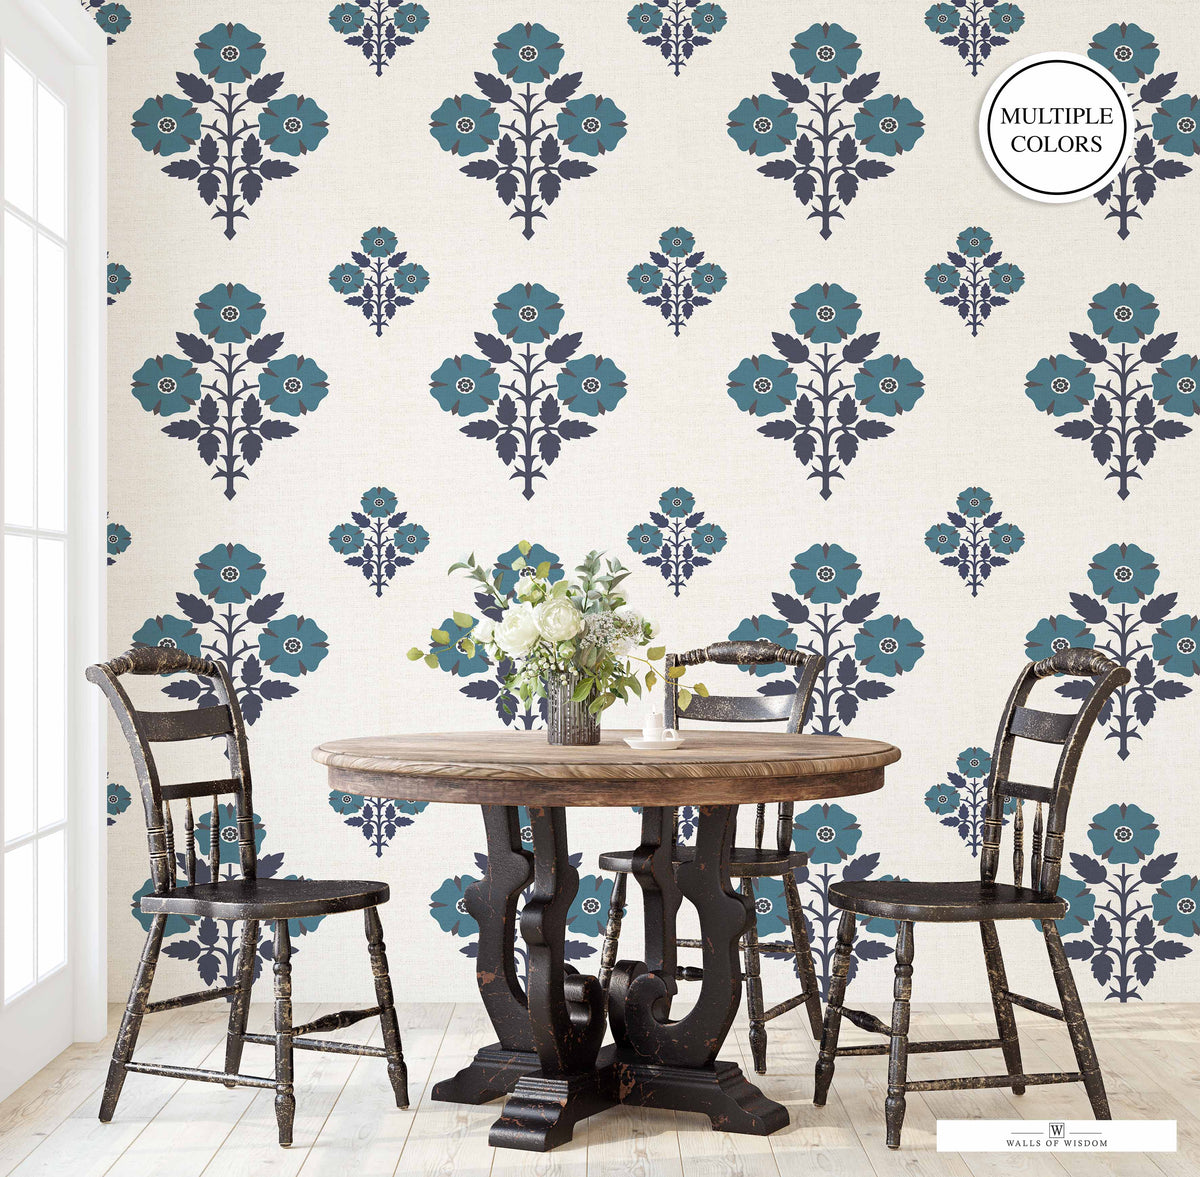 Steel Blue and Grey Peel & Stick Wallpaper with modern floral patterns, adding a serene touch to bedrooms